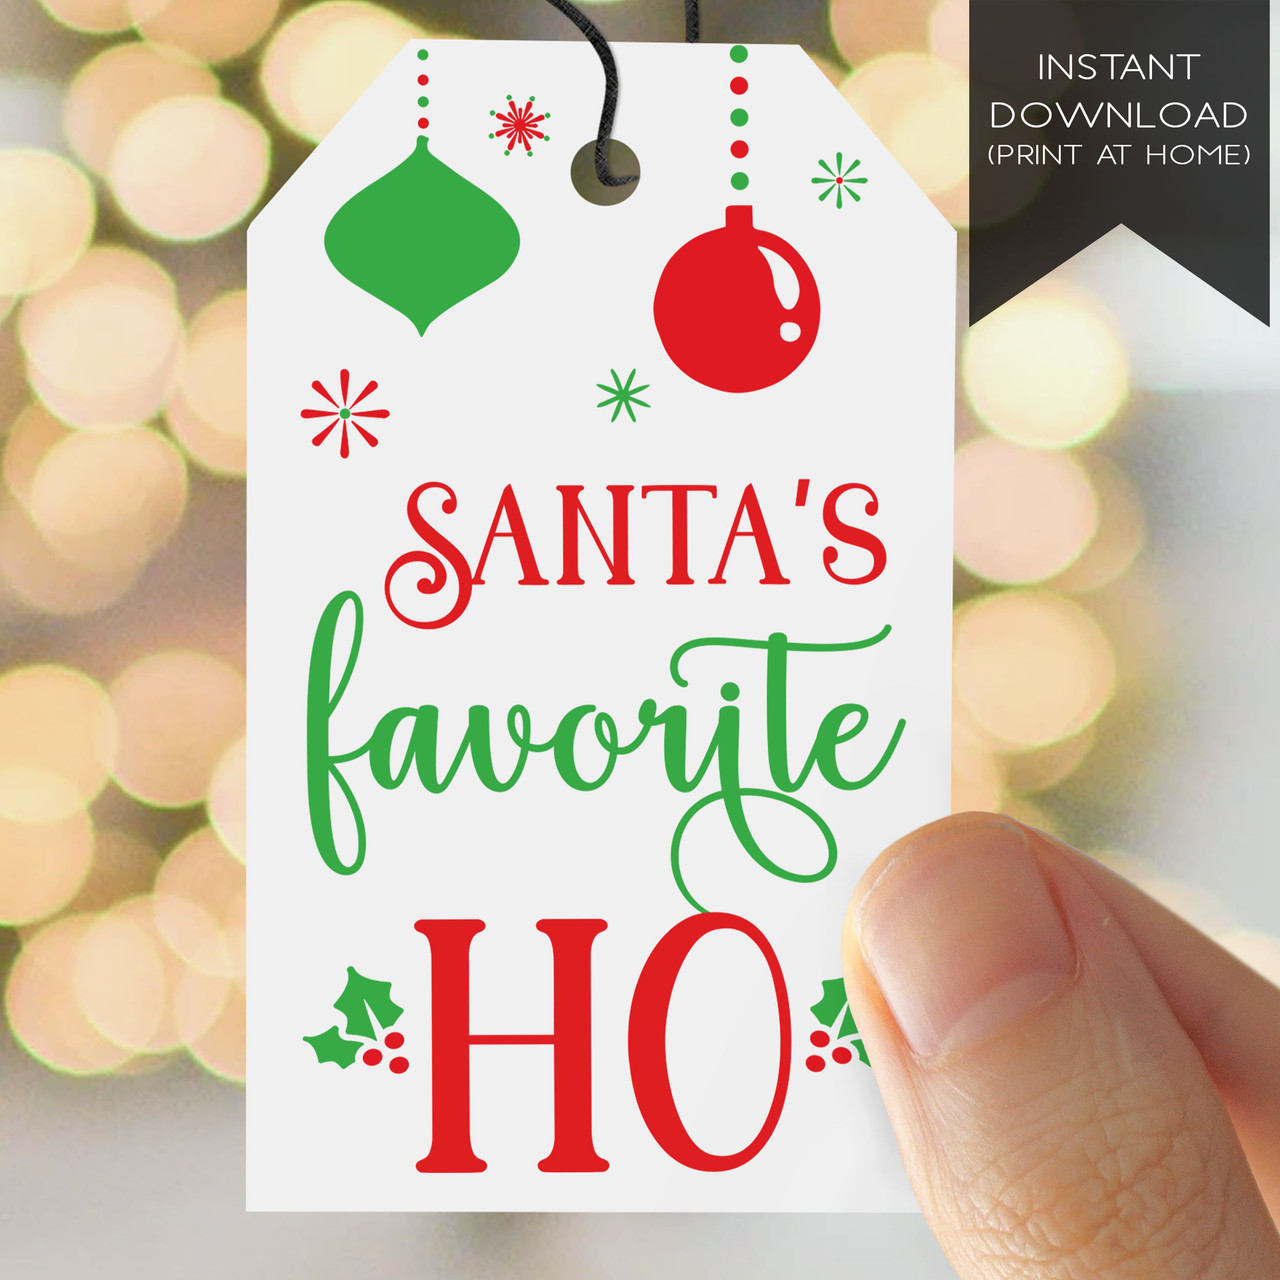 How to Create & Print Personalized Gift Tags